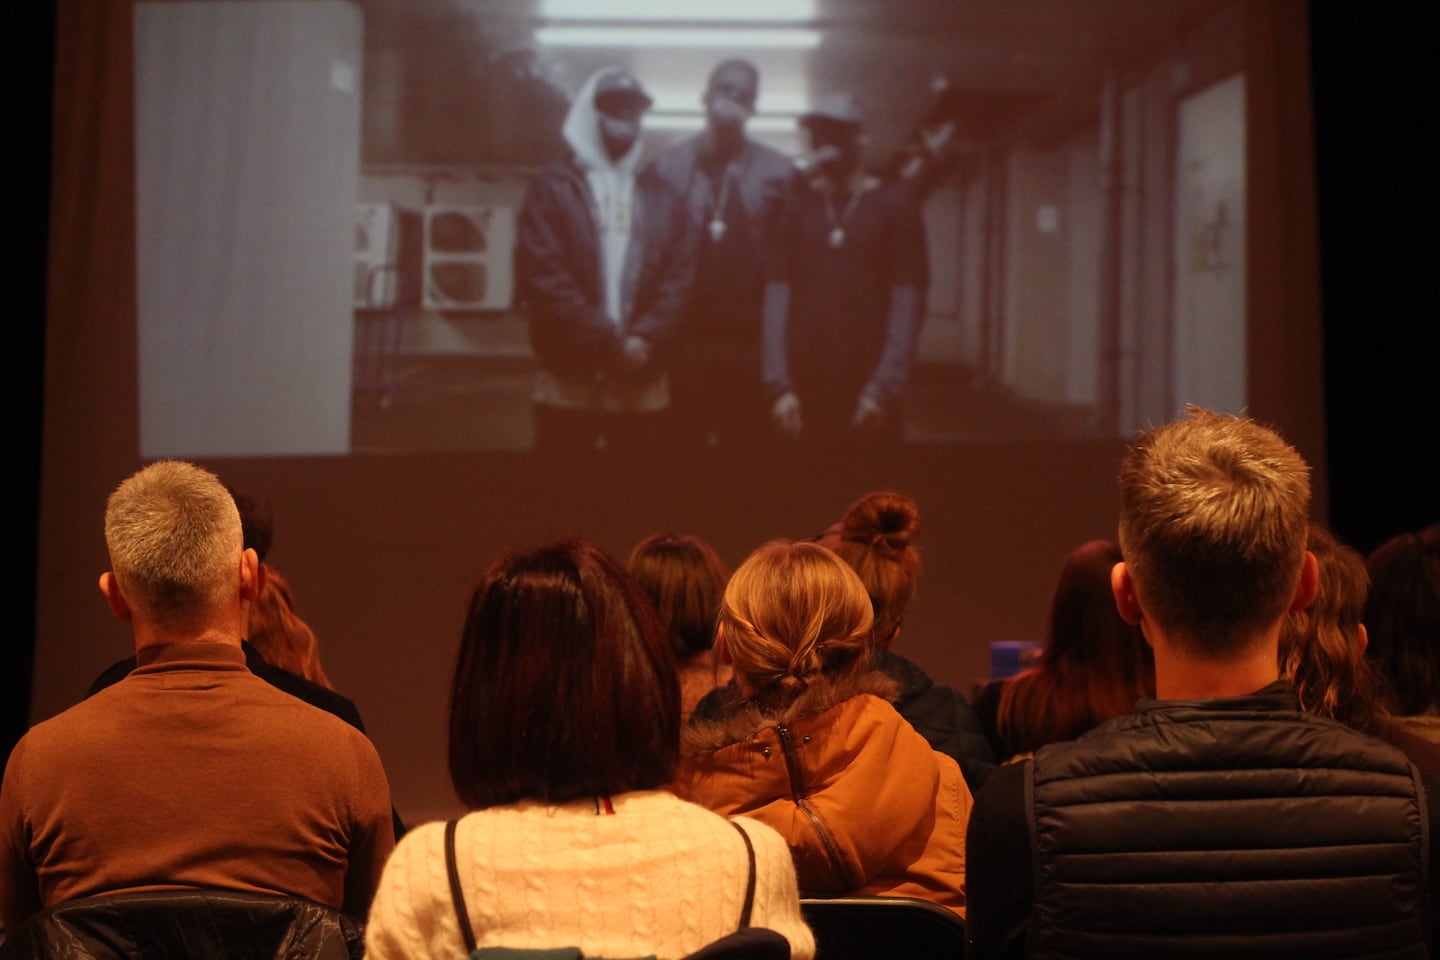 On a blurred background, three black men appear on a screen. In the foreground, we see the backs of the heads of the audience (all white, as far as we can tell) who are watching the screen